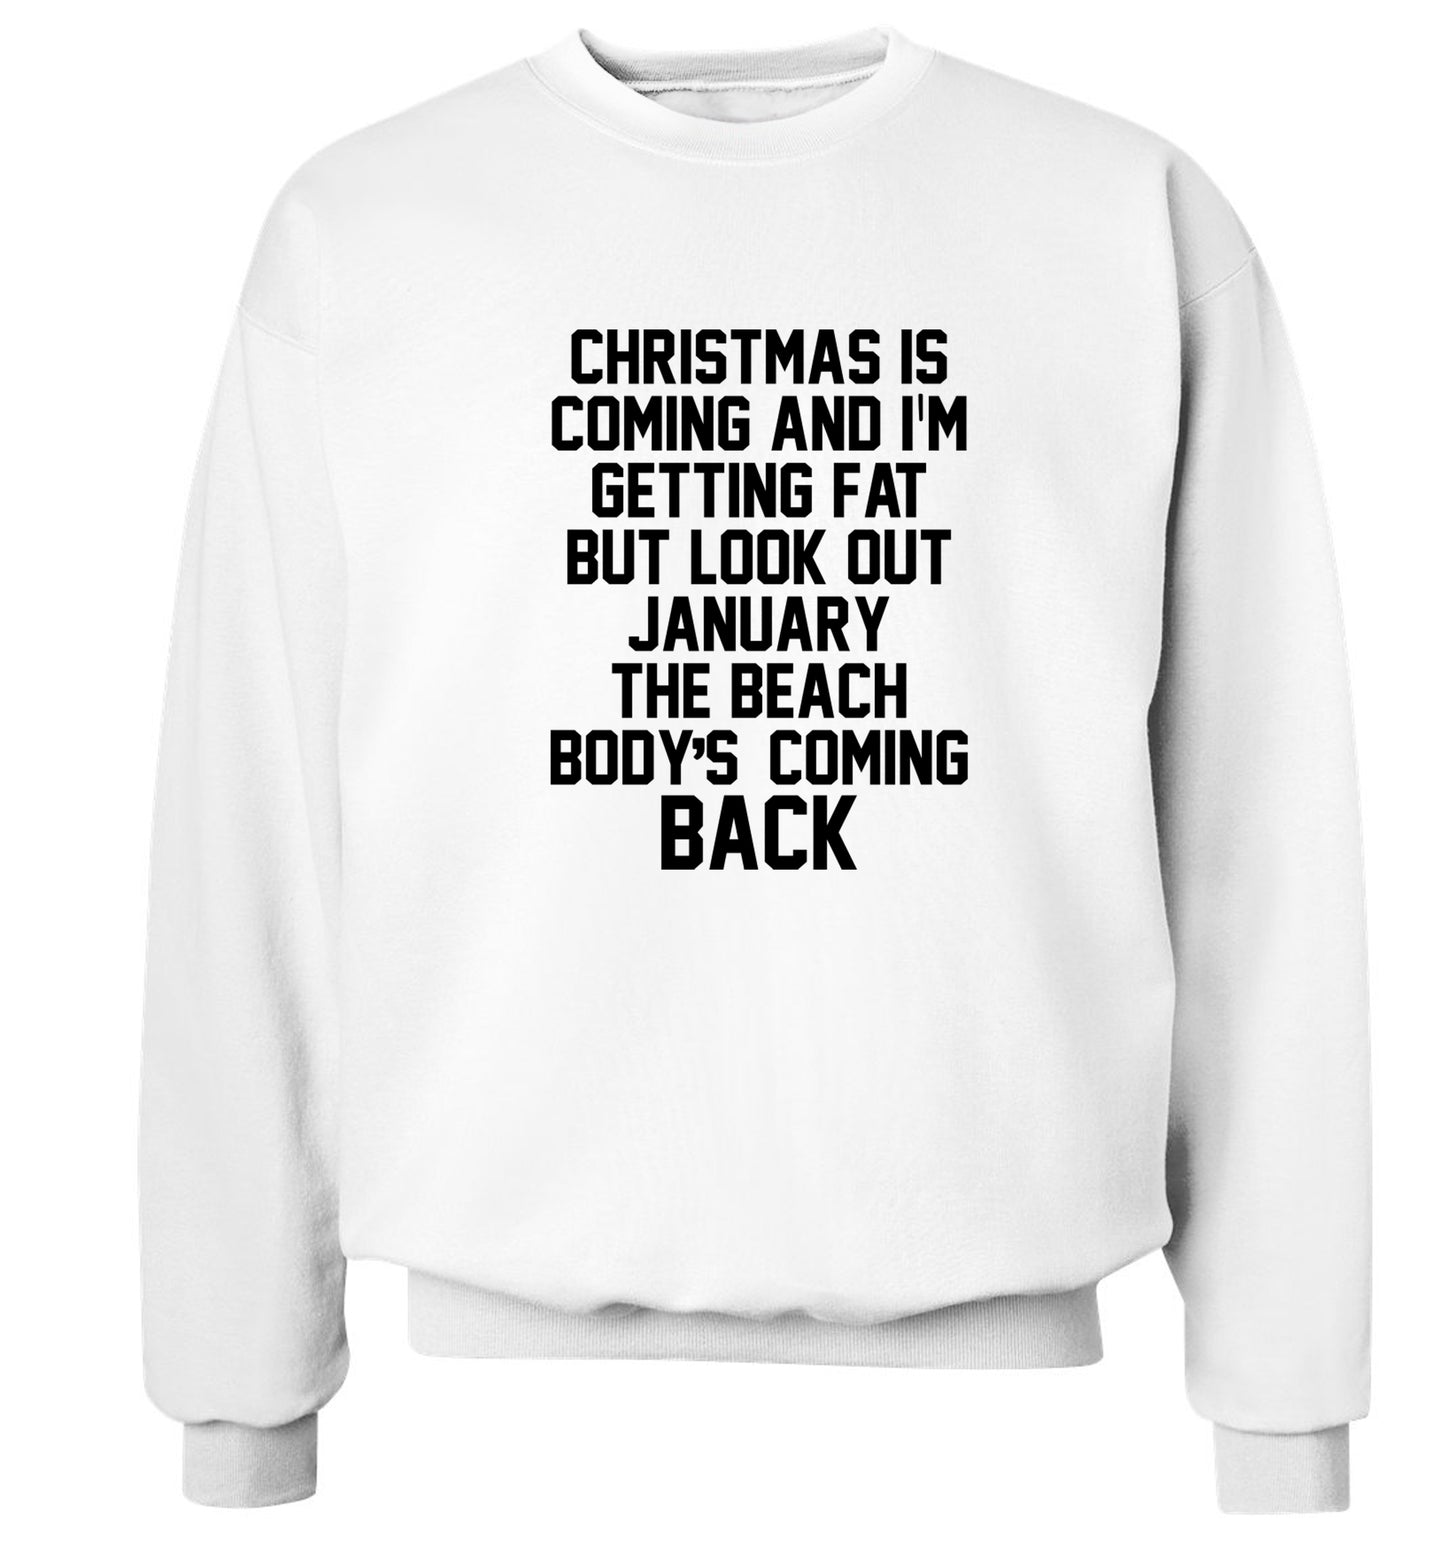 Christmas is coming and I'm getting fat but look out January the beach body's coming back! Adult's unisex white Sweater 2XL